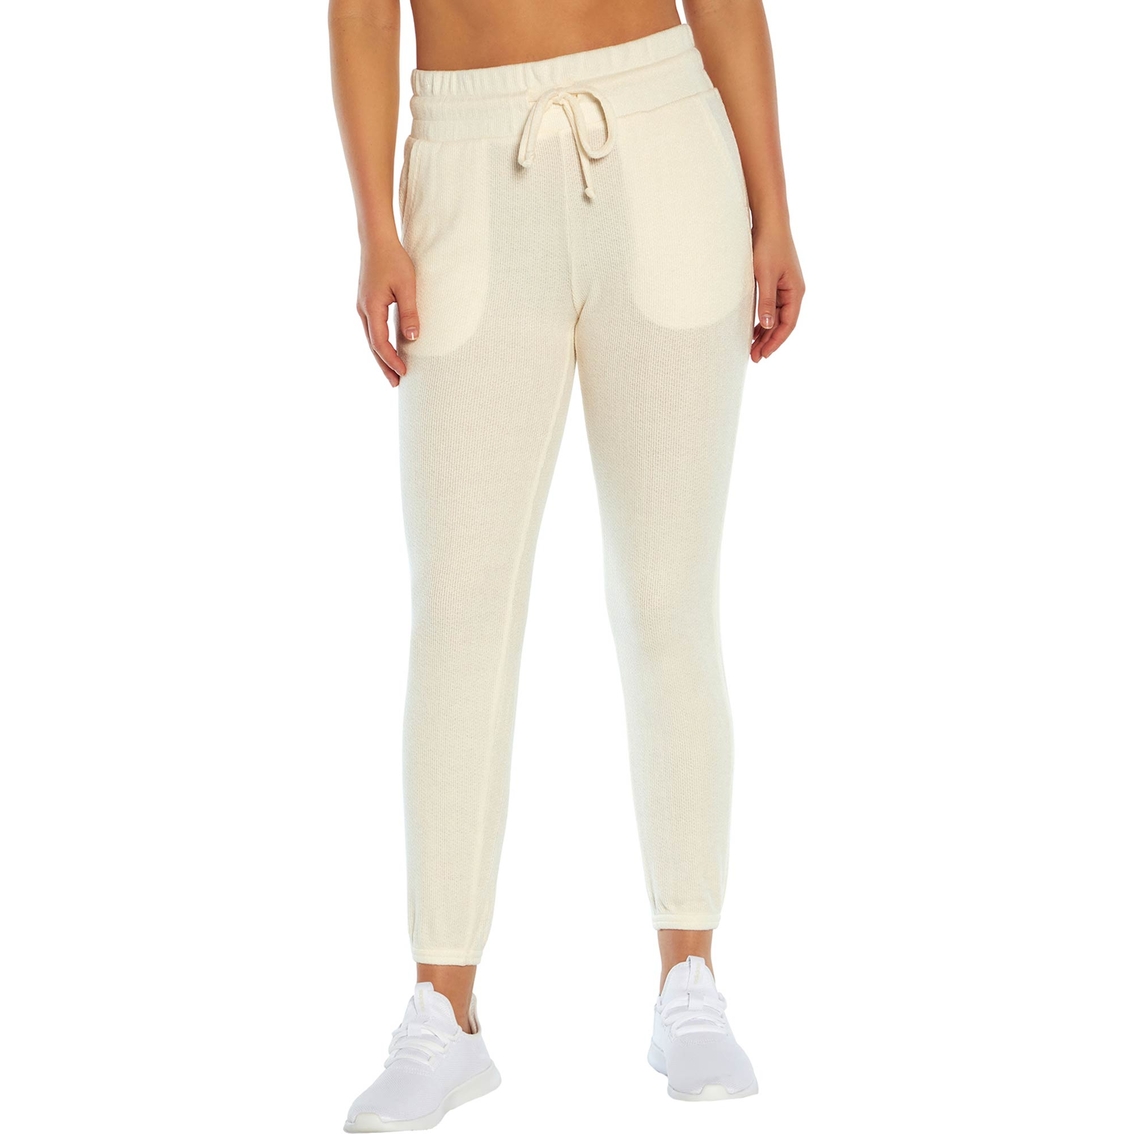 Jessica Simpson Anabella Joggers | Pants | Clothing & Accessories ...